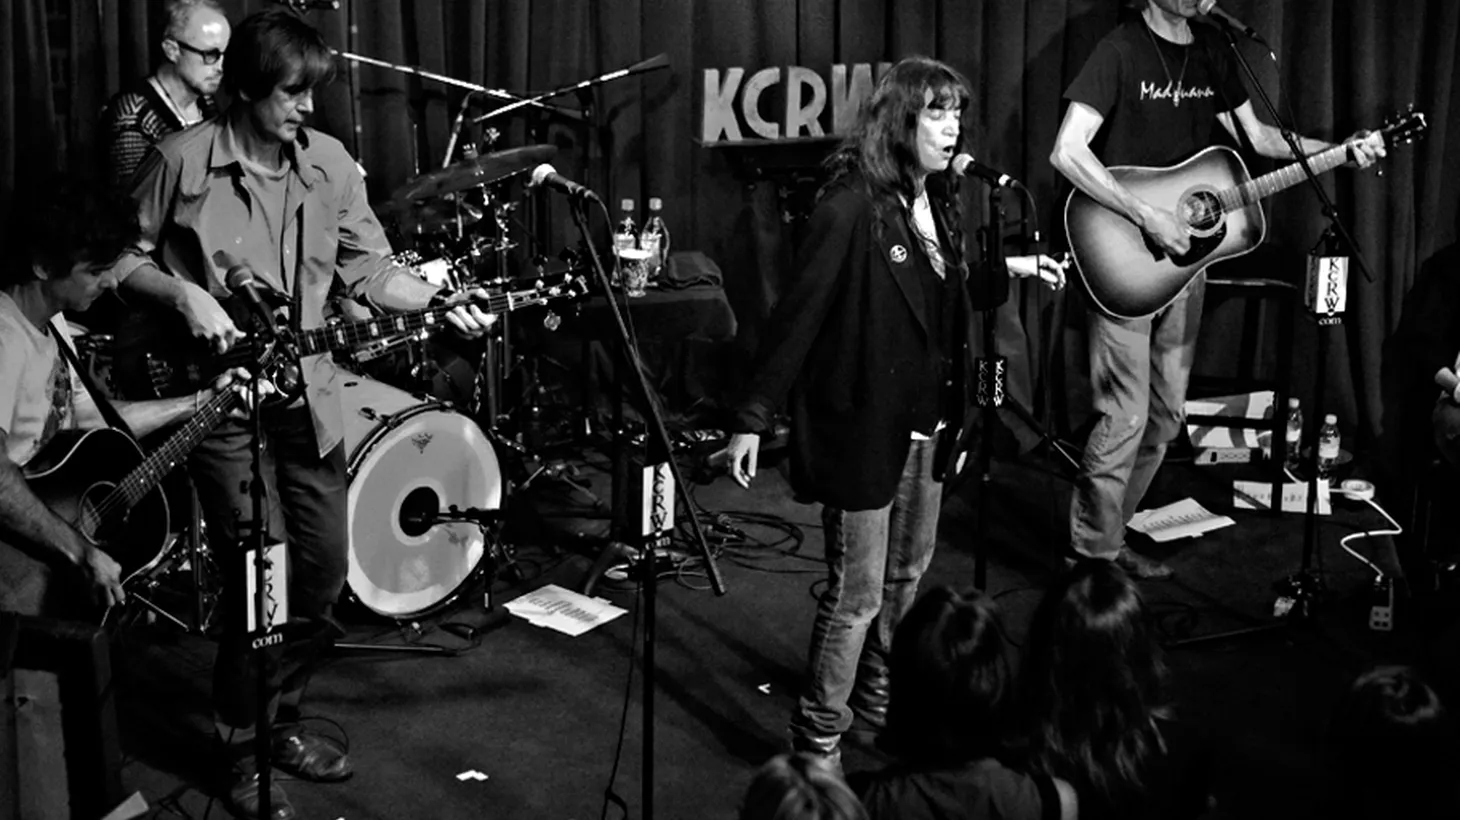 When Patti Smith took the stage for KCRW's Apogee Sessions a couple of weeks ago, we knew we were in for a very special performance.